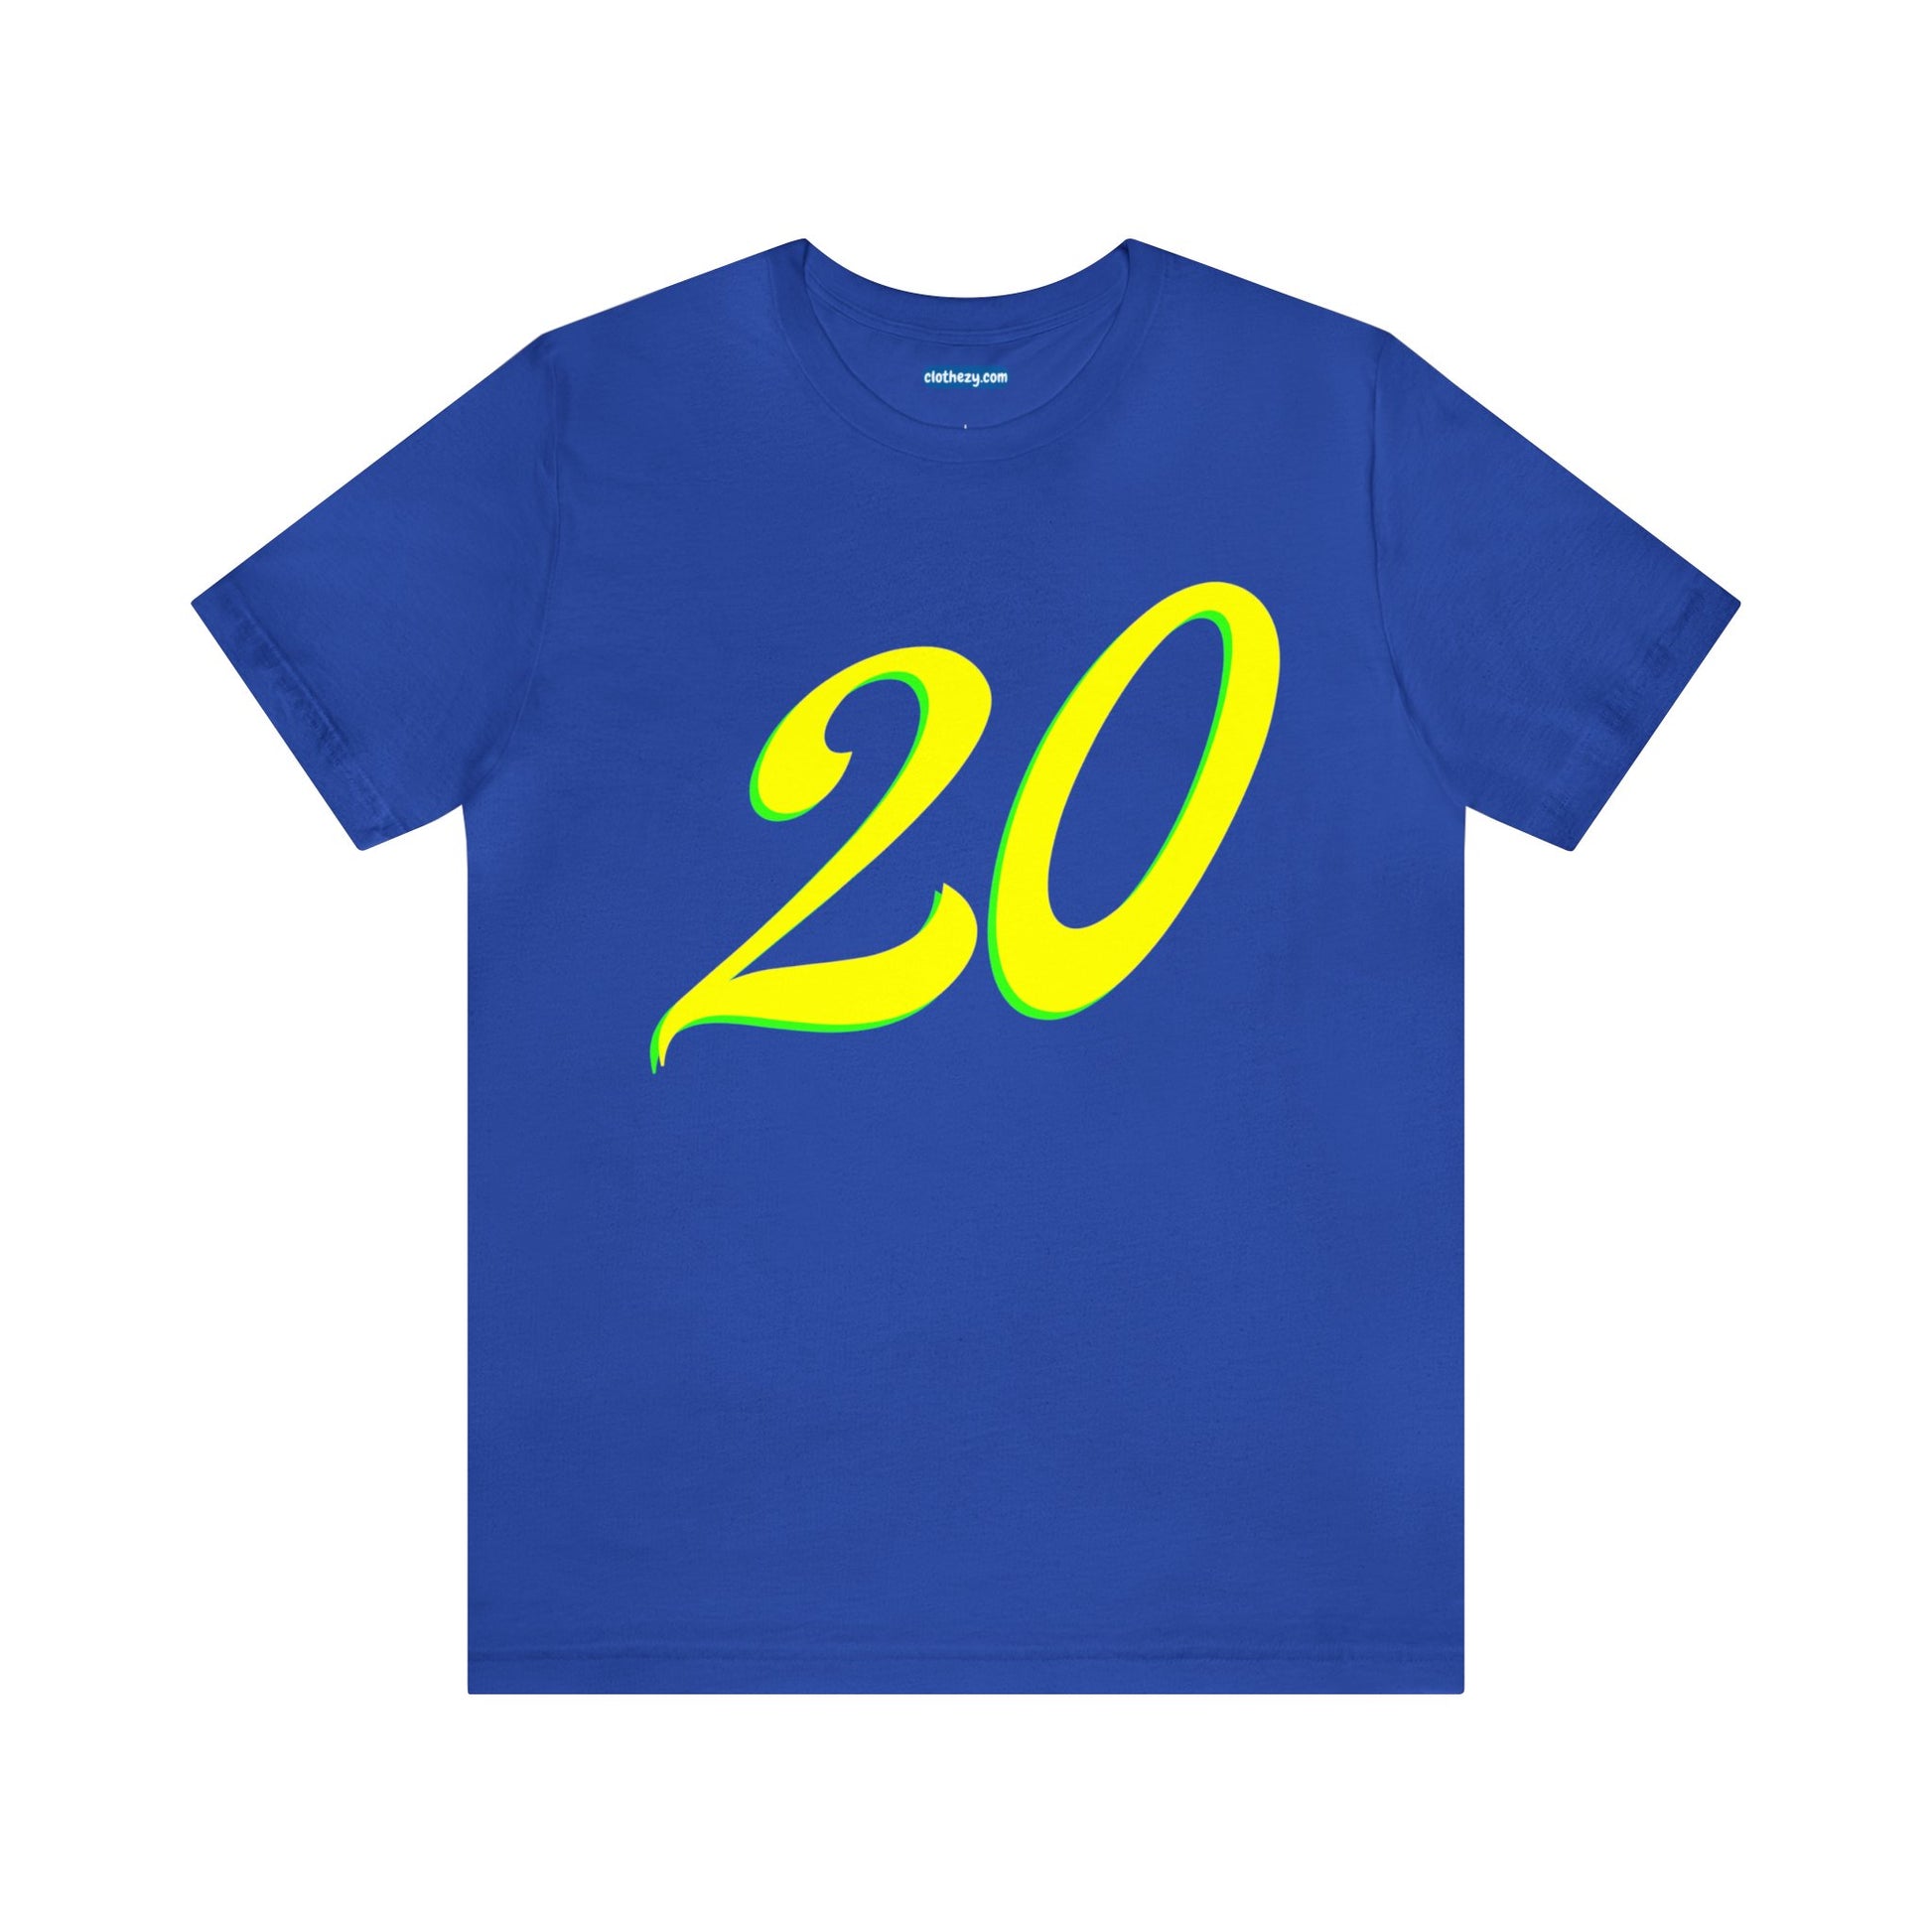 Number 20 Design - Soft Cotton Tee for birthdays and celebrations, Gift for friends and family, Multiple Options by clothezy.com in Royal Blue Size Small - Buy Now